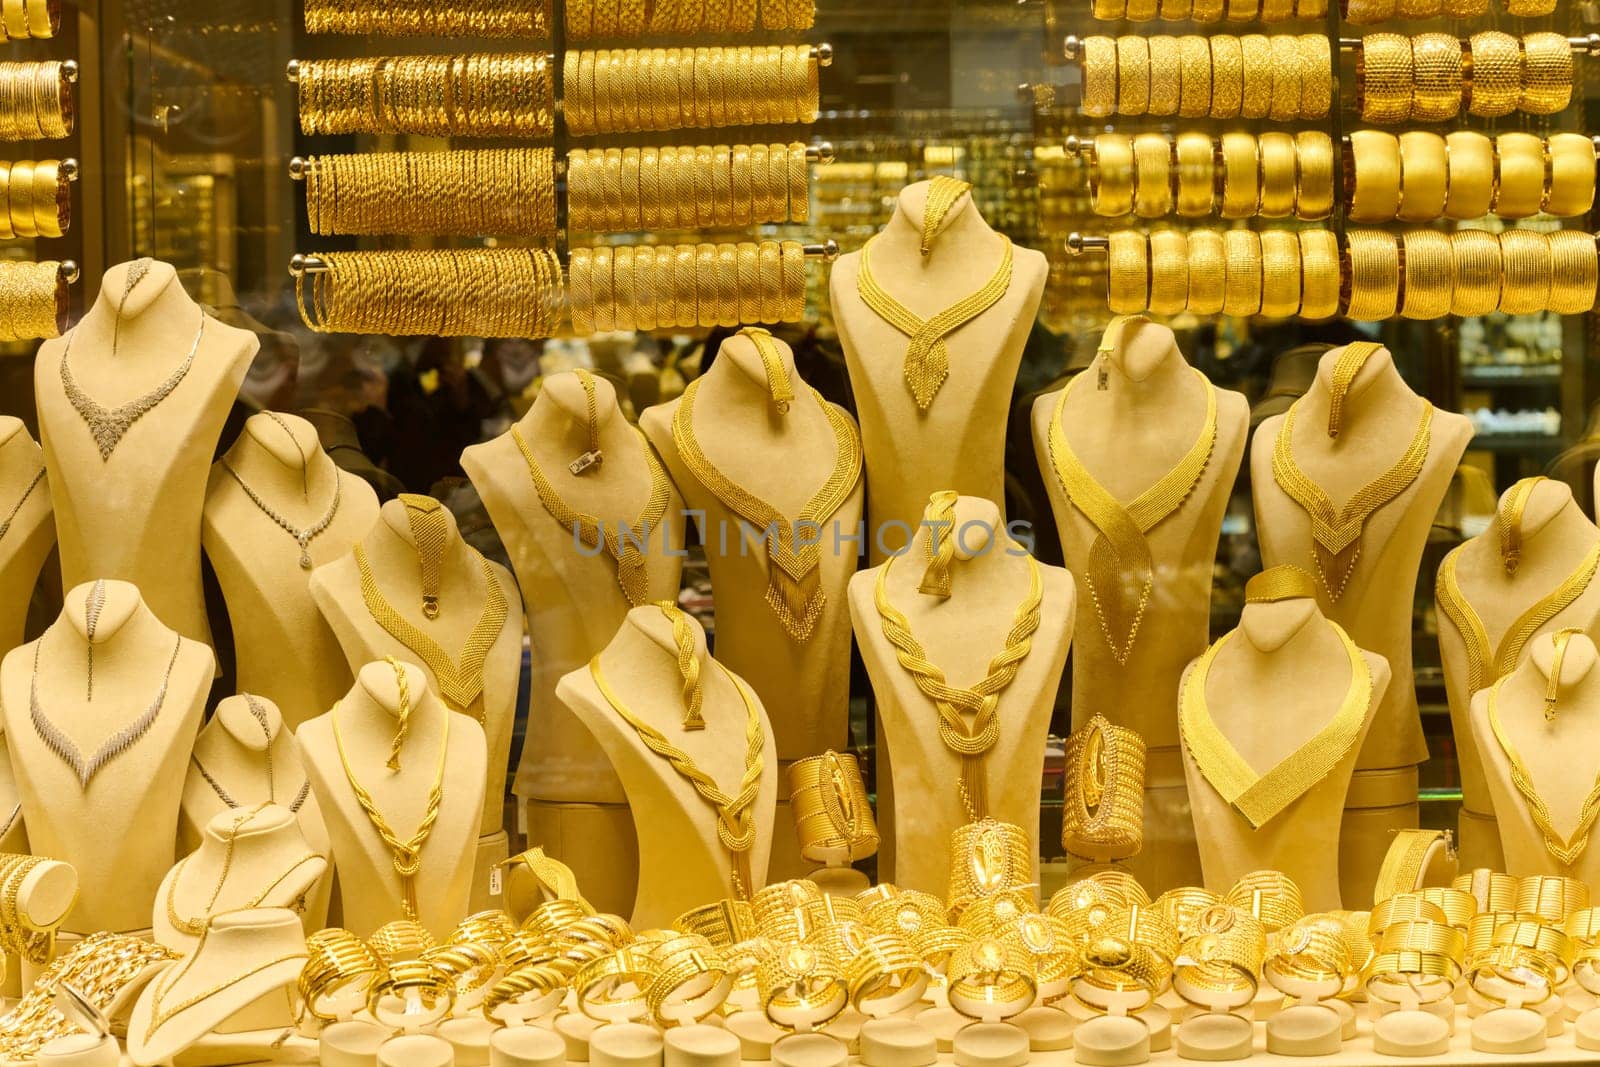 Treasures of Istanbul: A Dazzling Display of Handmade Gold Jewelry by dotshock